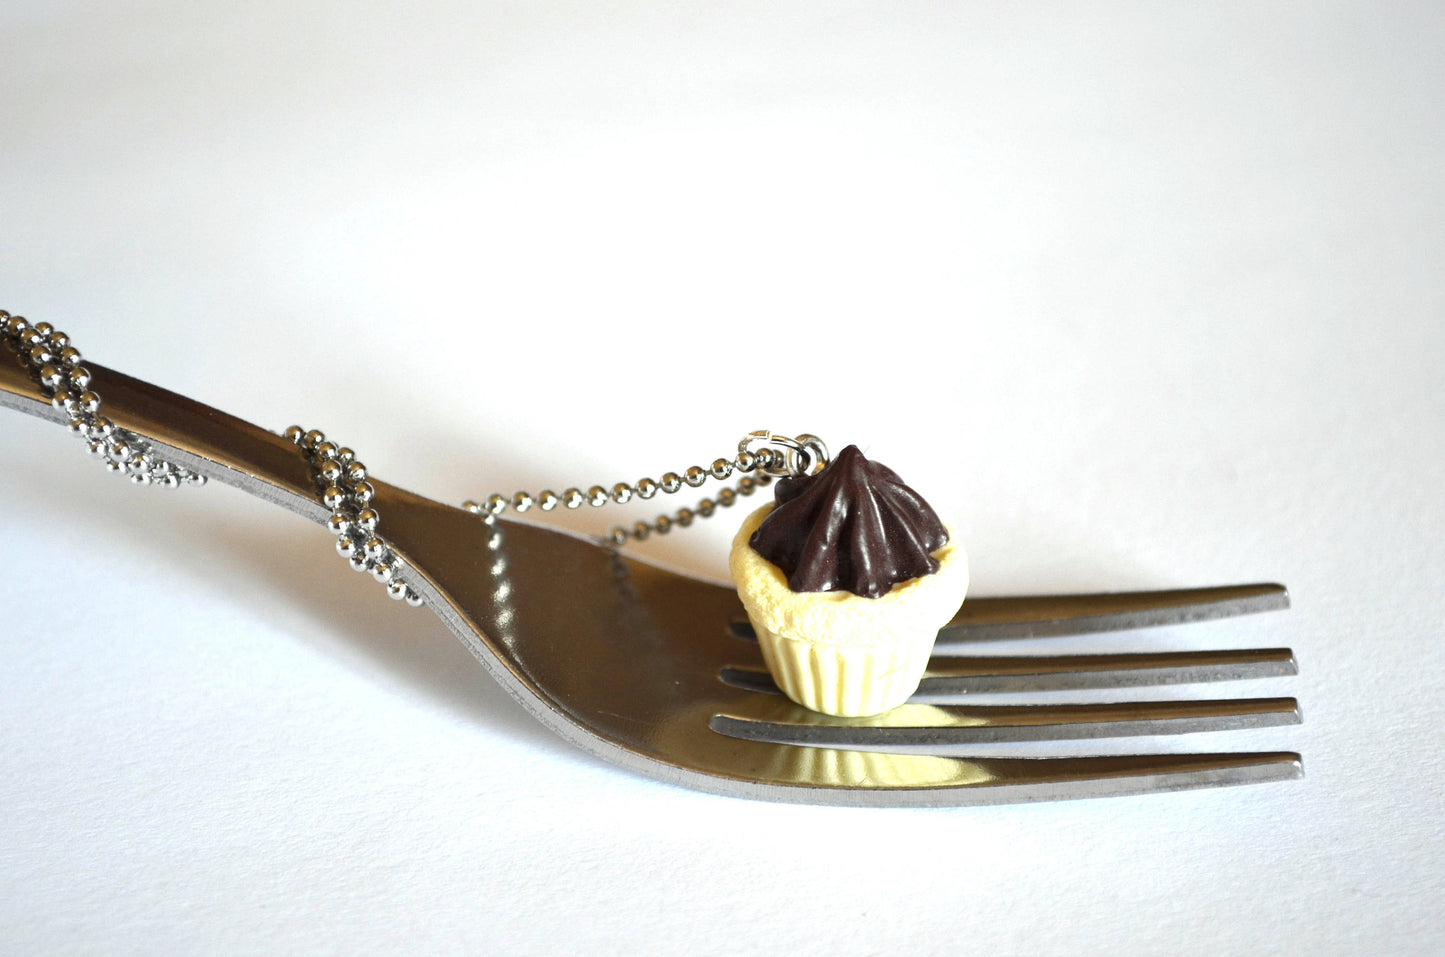 Vanilla Cupcake with Chocolate Frosting Necklace